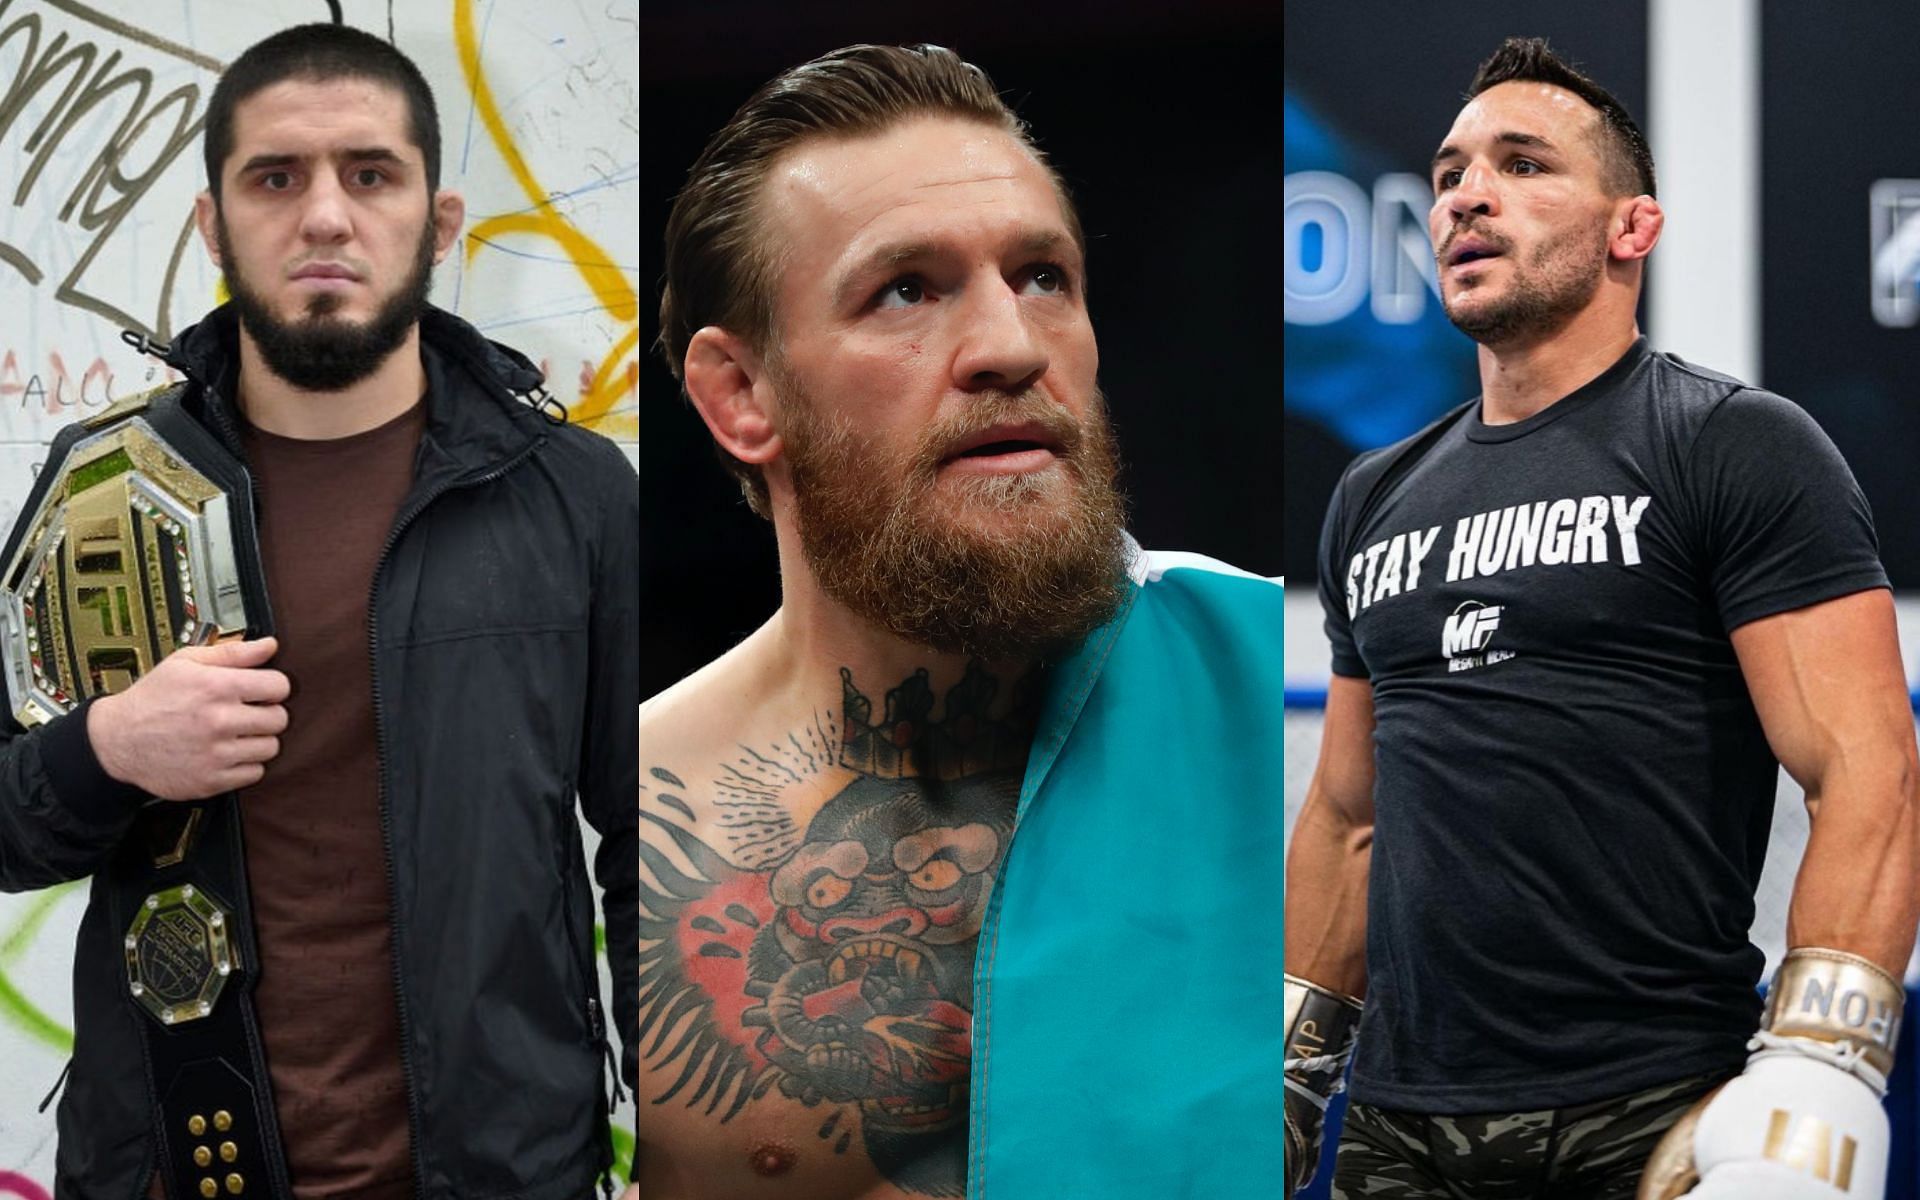 Islam Makhachev (left), Conor McGregor (centre) and Michael Chandler (right) [Image Credits: Getty Images, @mikechandlermma and @islam_makhachev on Instagram]